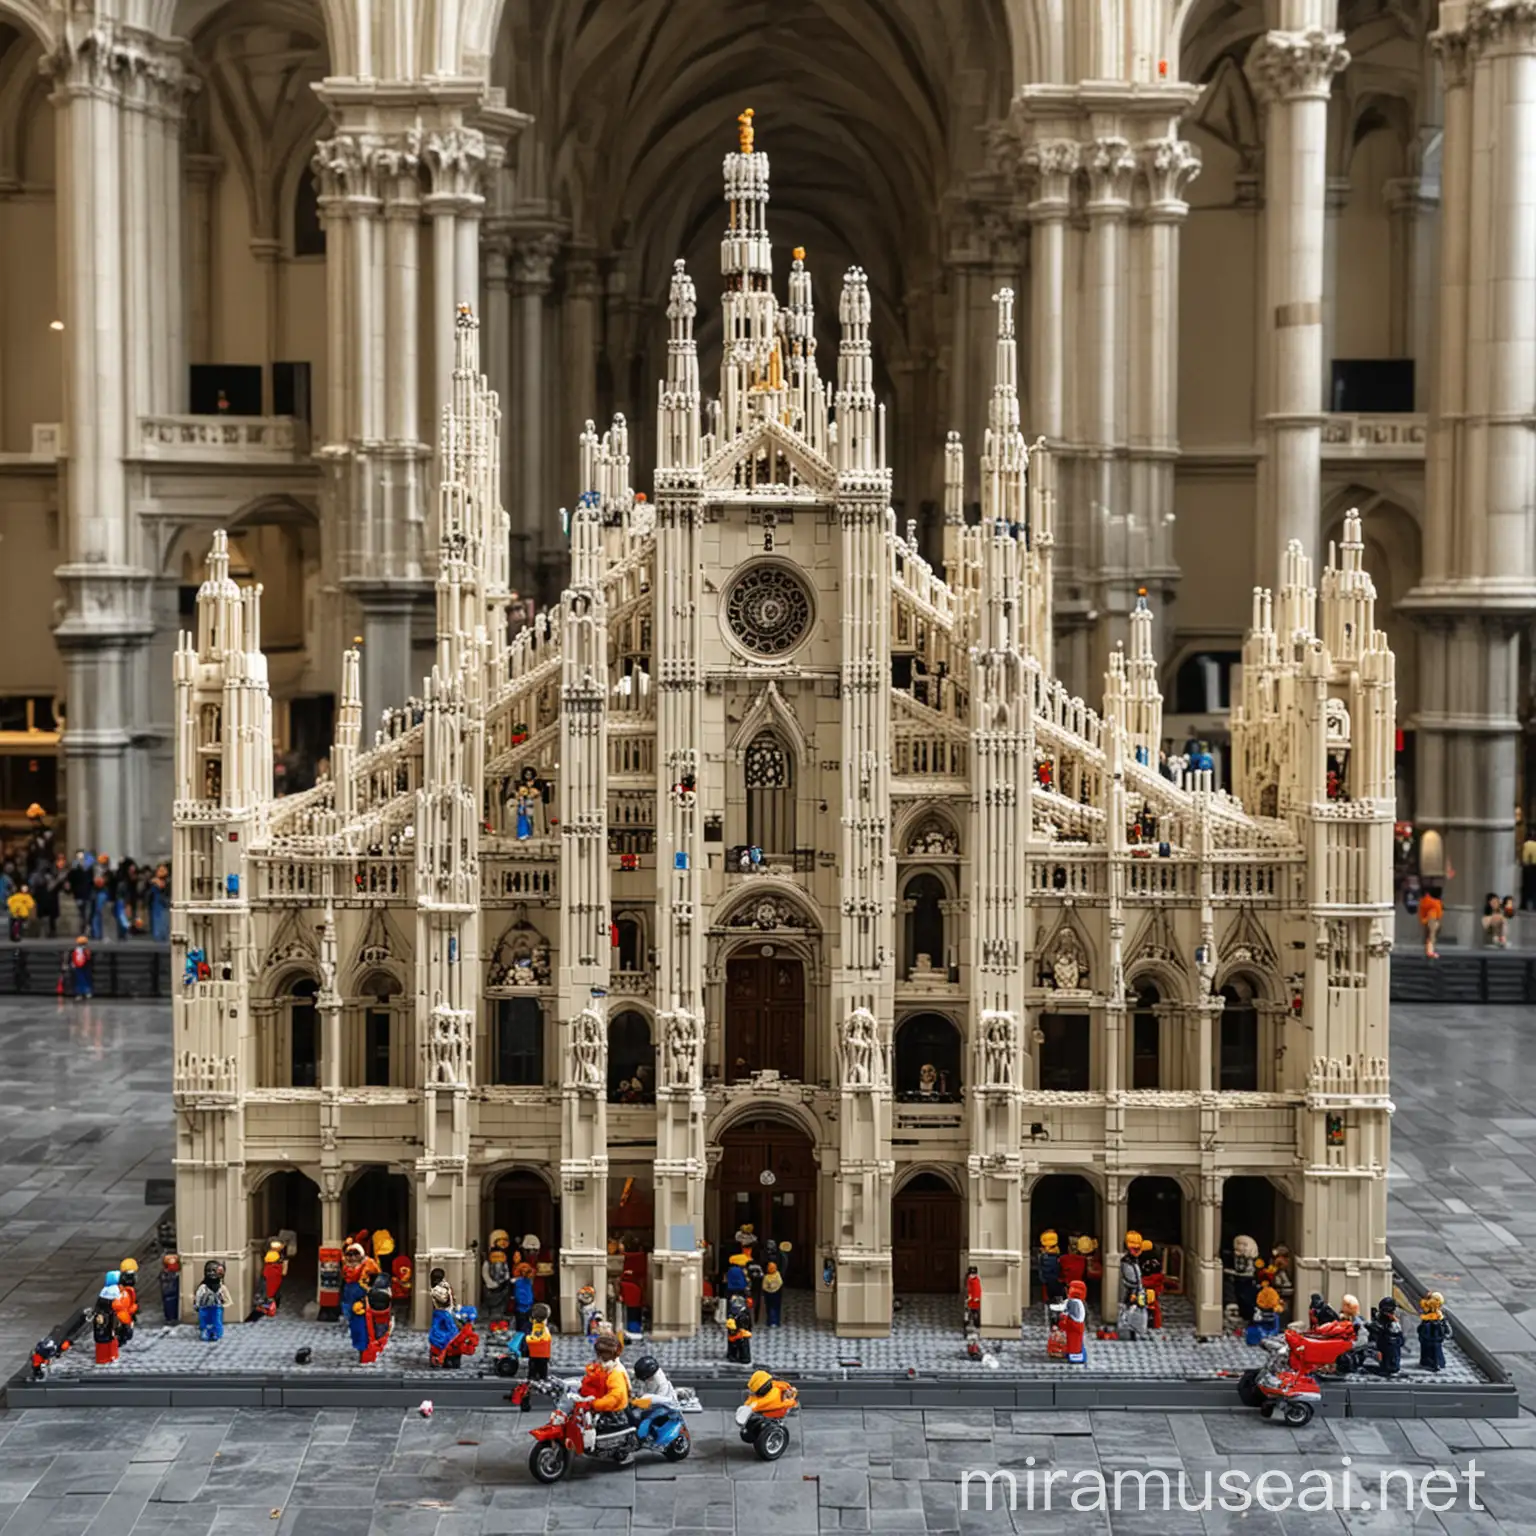 do a kid play with the lego of   duomo of Milan
